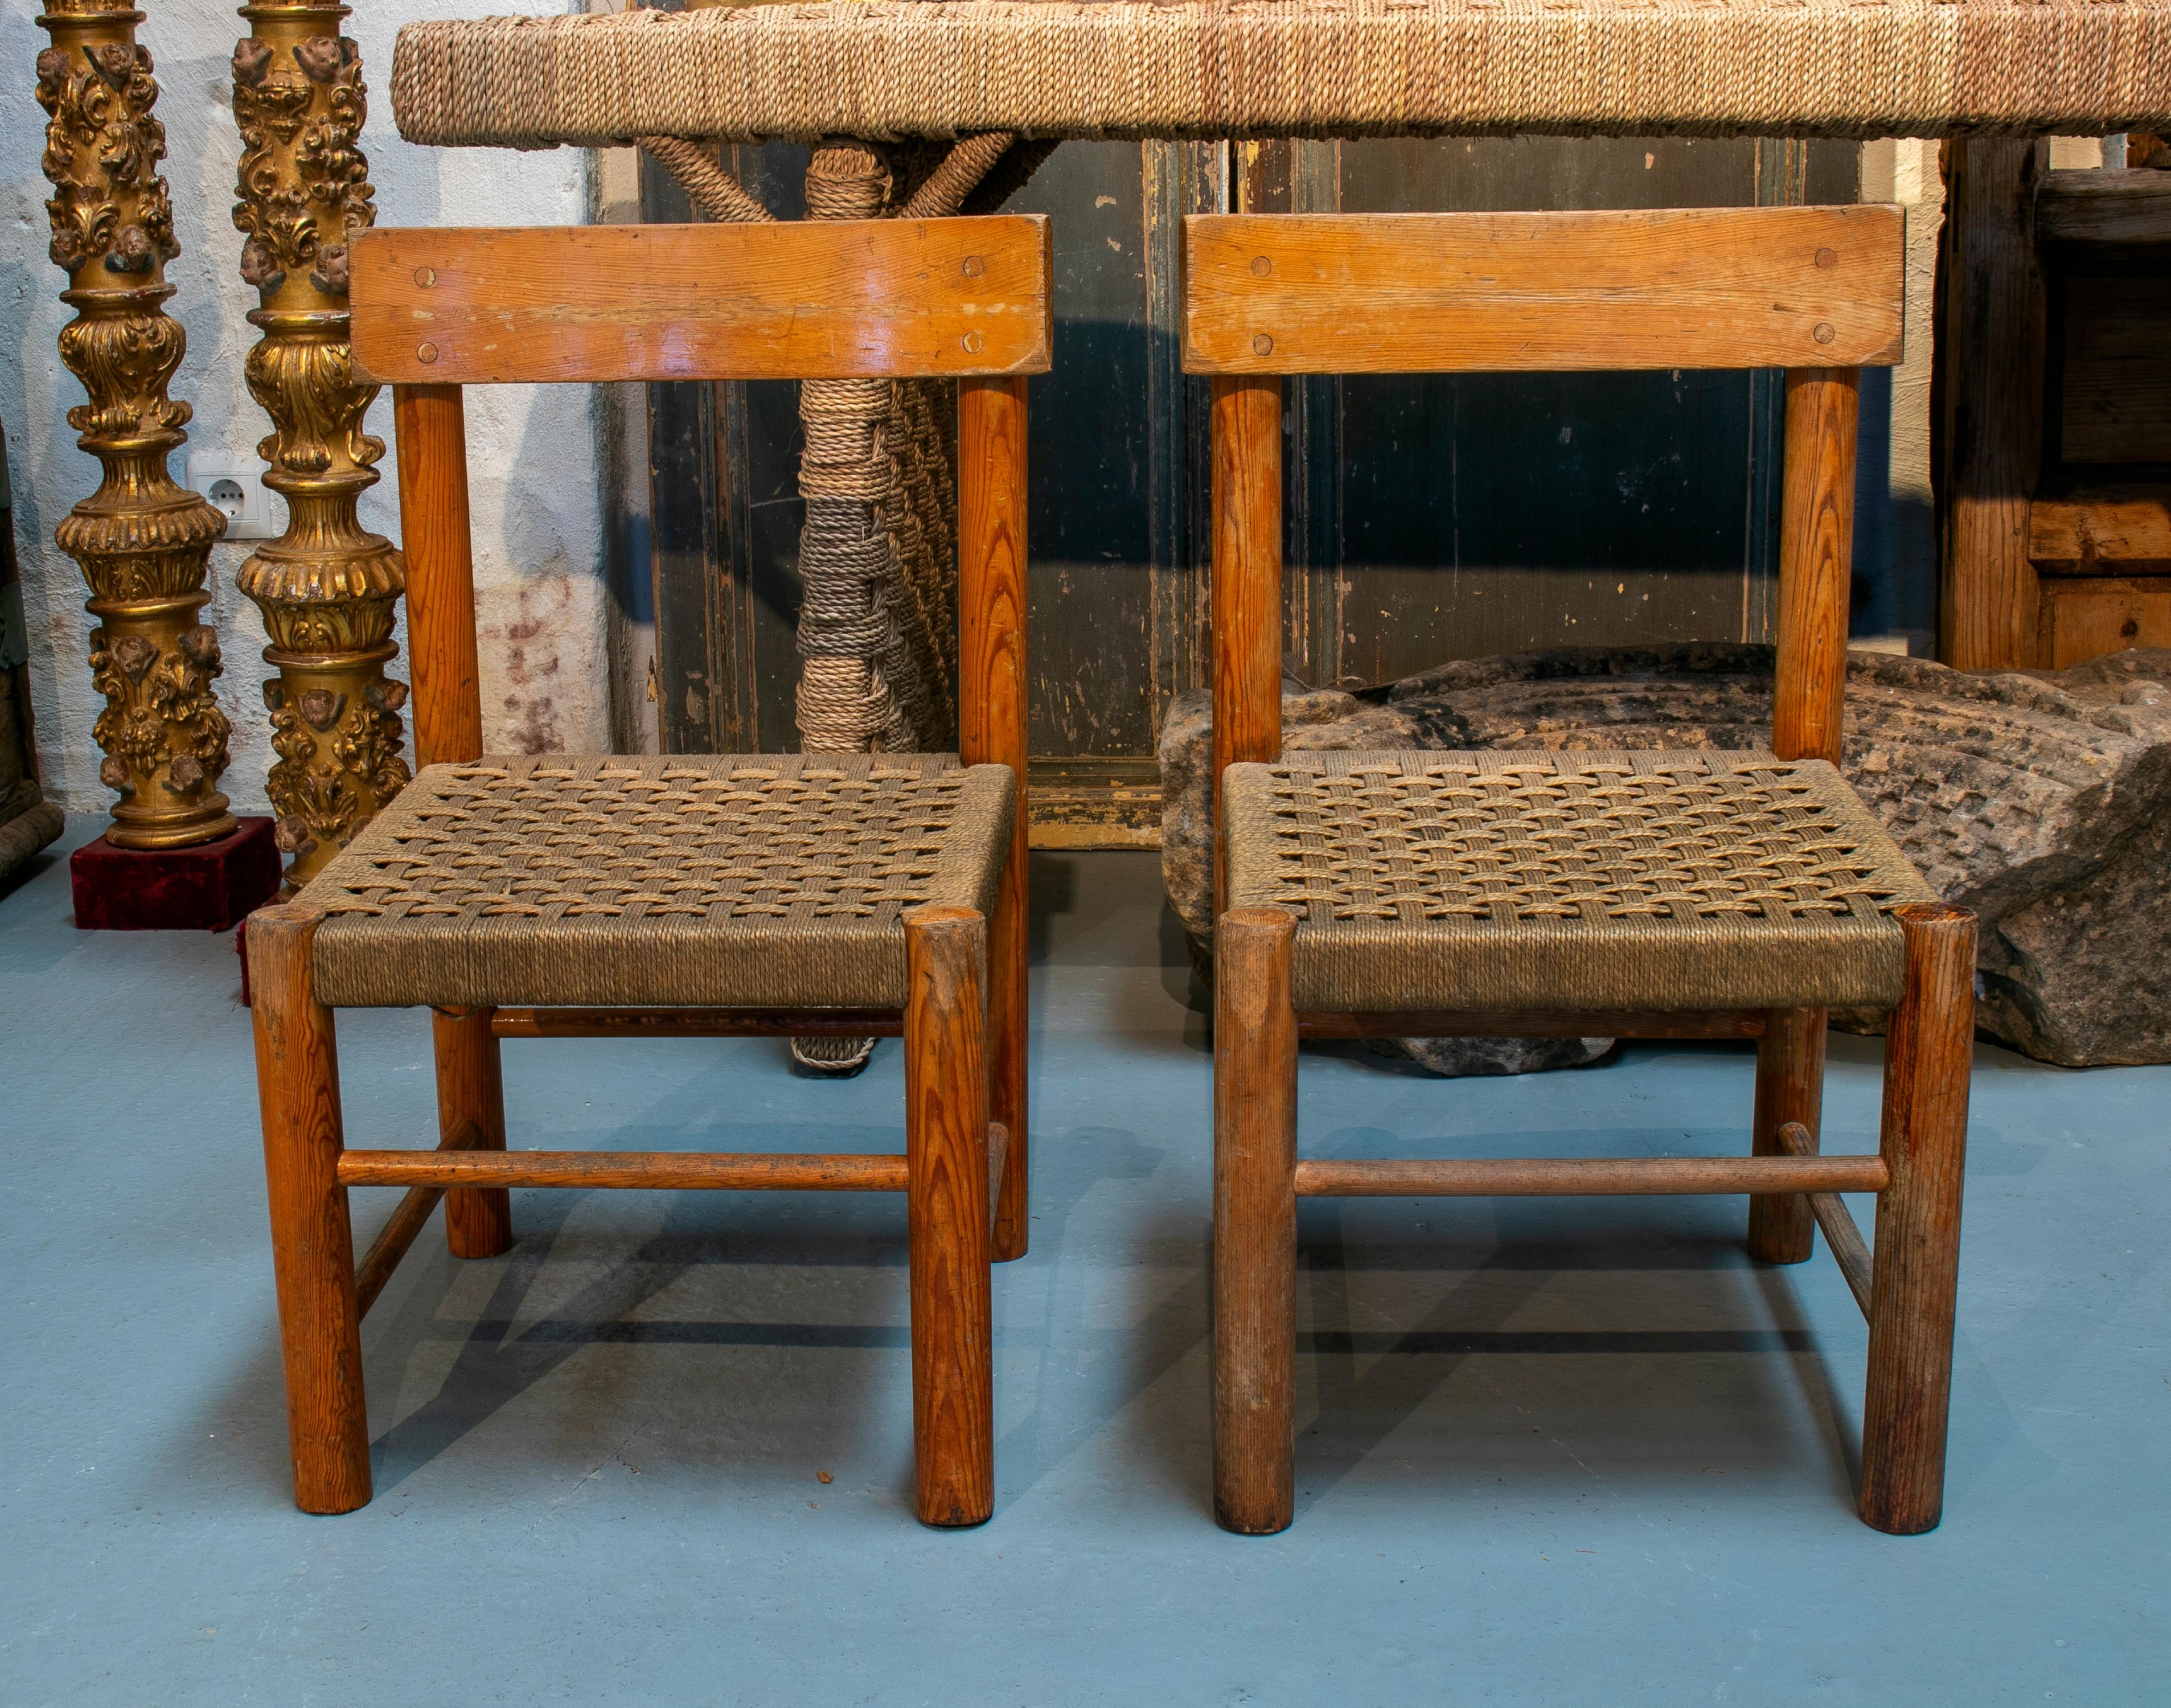 1970s pair of Spanish chairs with woven wicker seats.